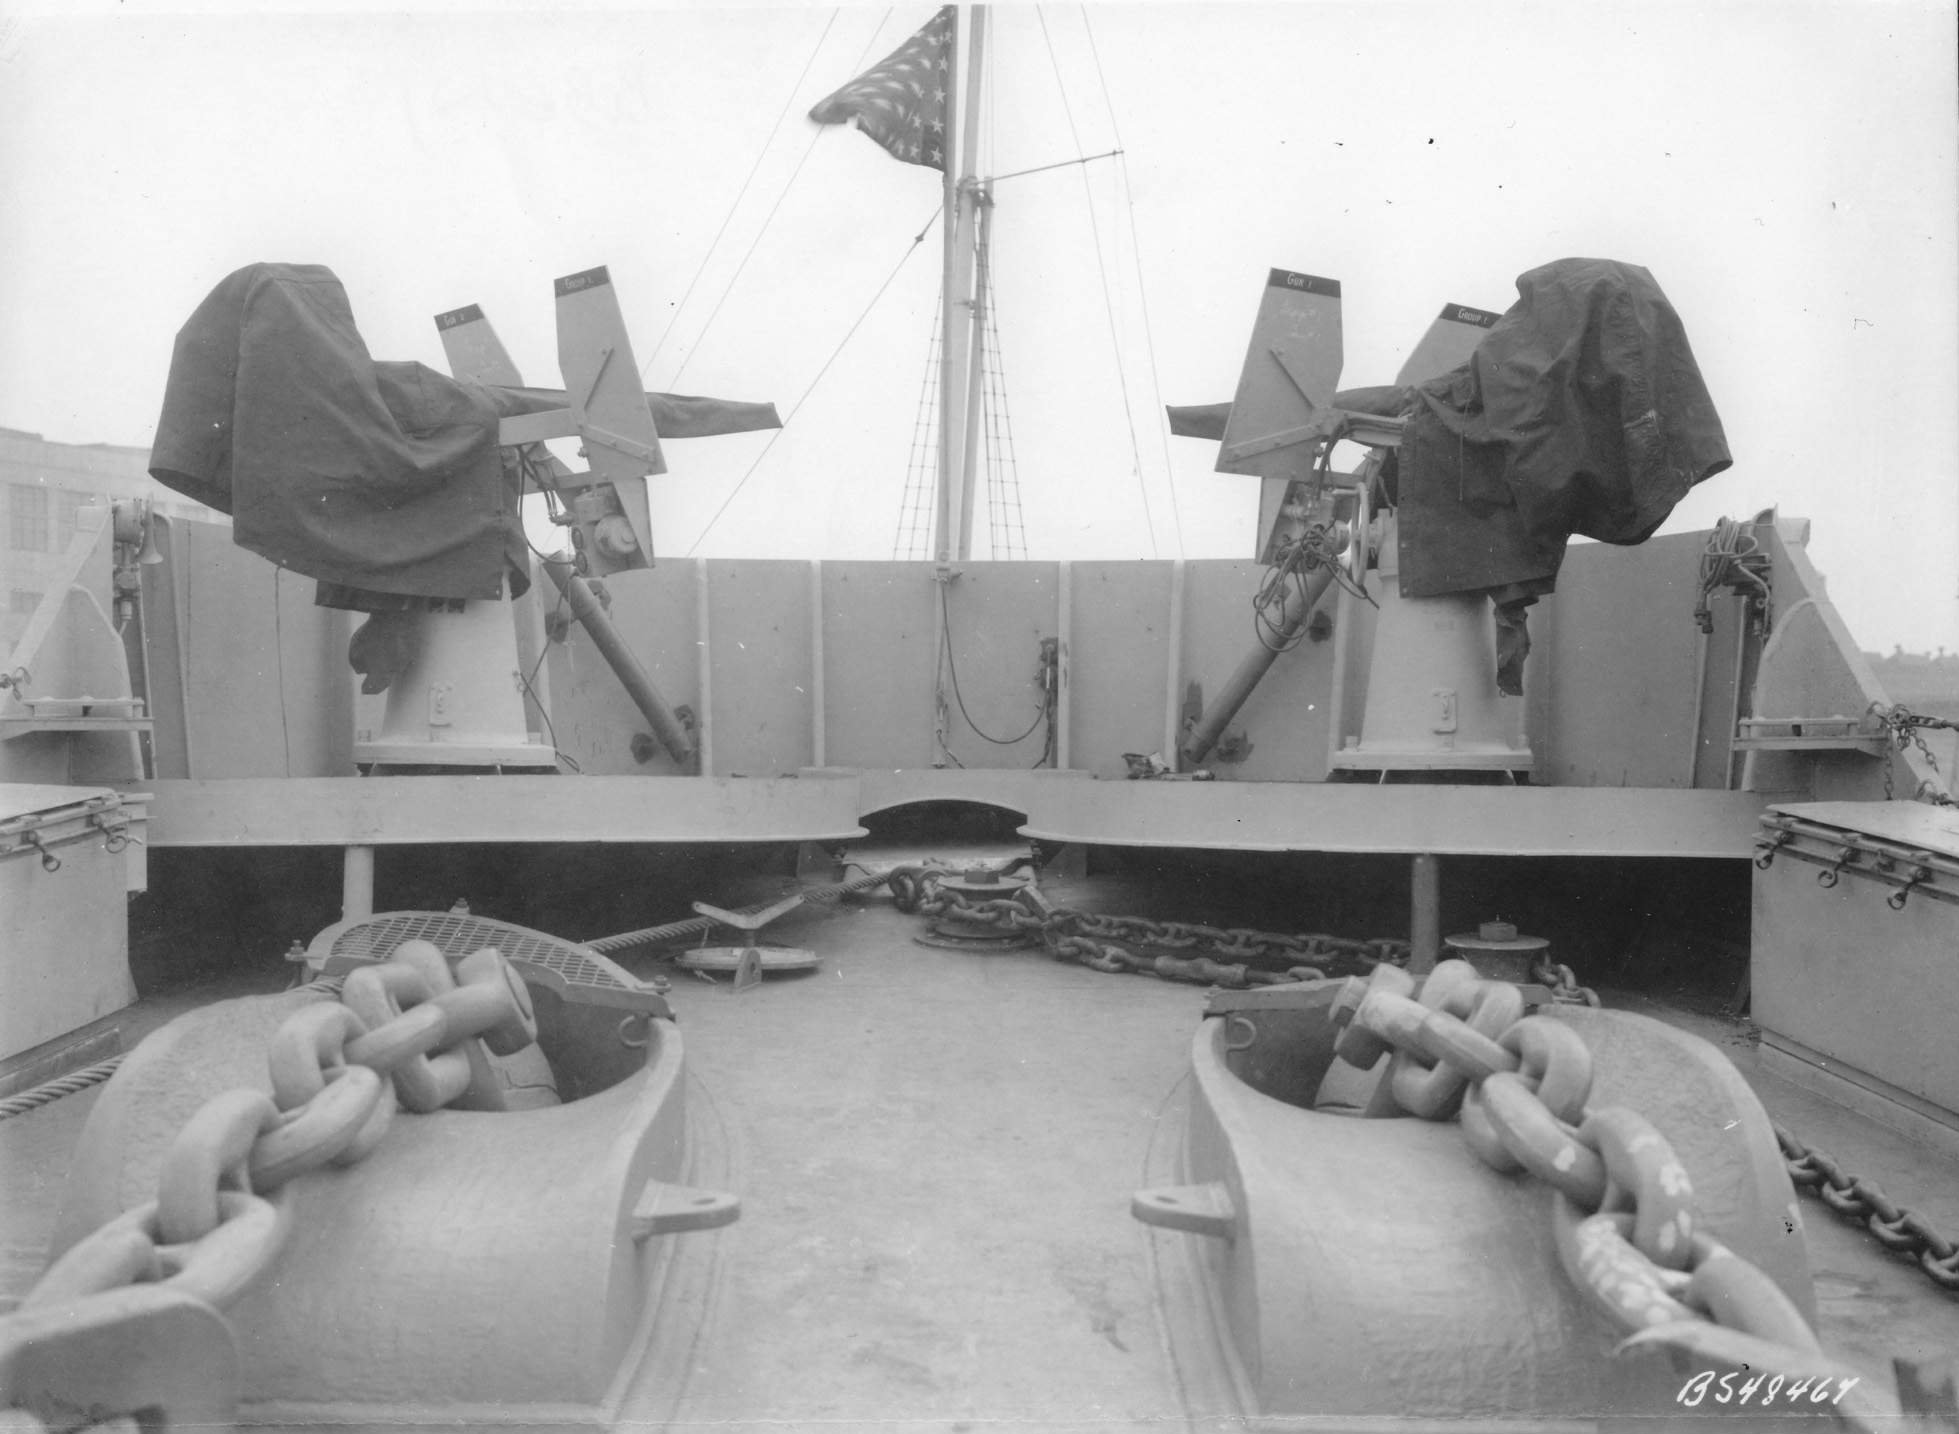 20mm Oerlikon mounts on the main deck at the bow of USS Iowa, New York Navy Yard, New York, United States, 9 Jul 1943